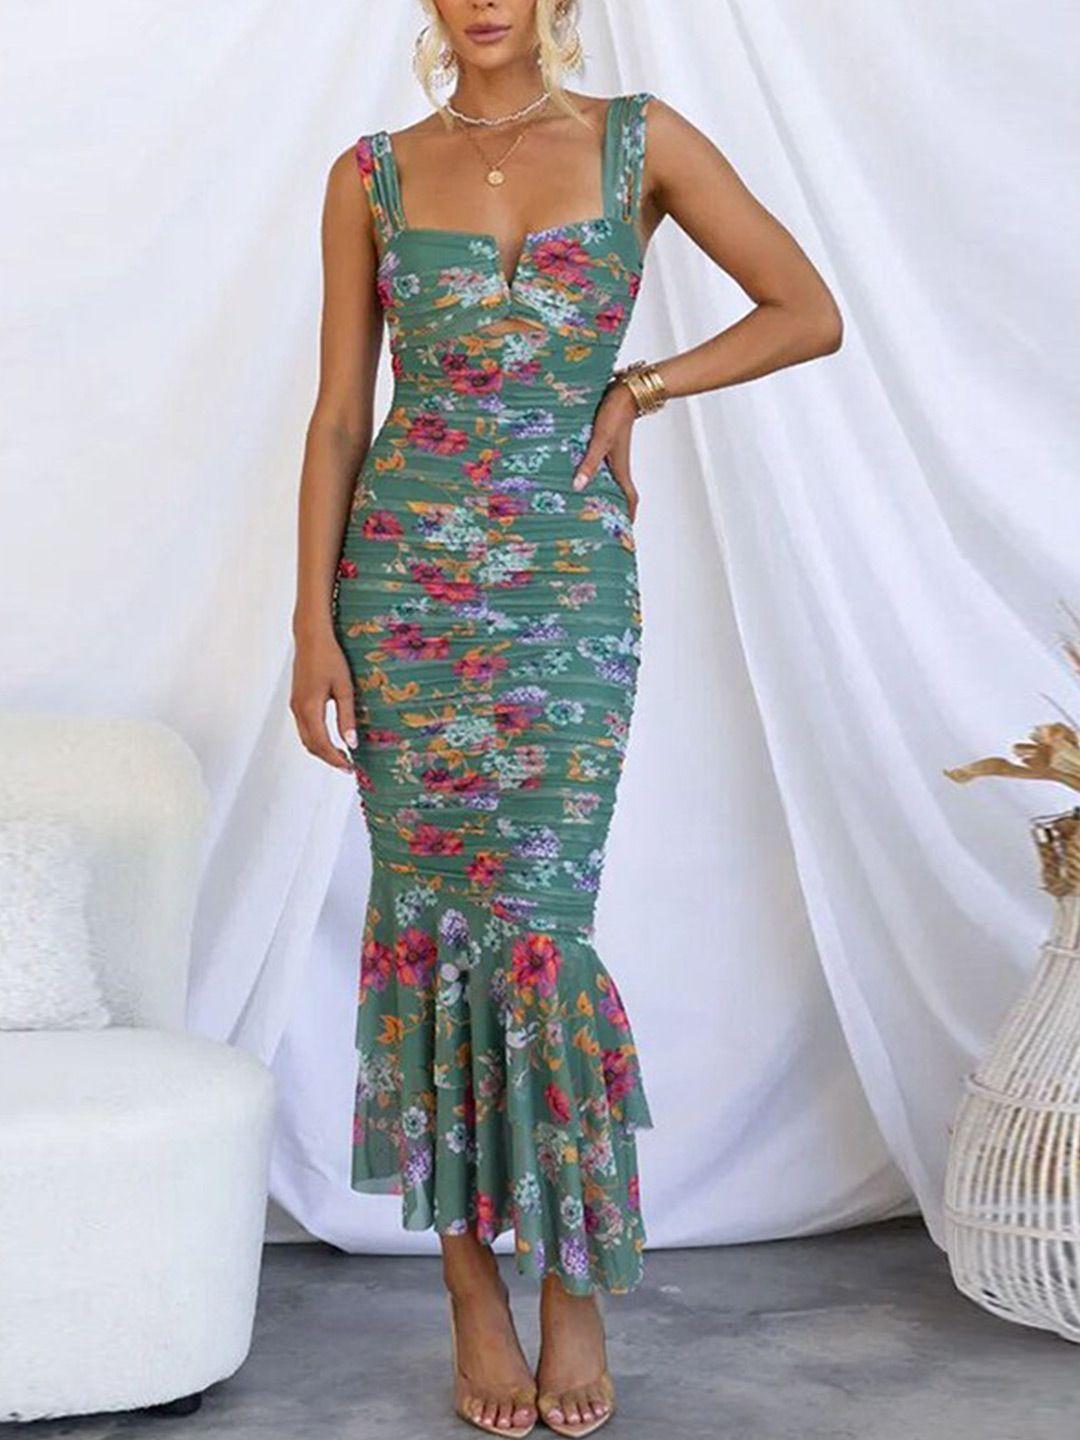 stylecast green floral printed shoulder strap ruched bodycone maxi dress